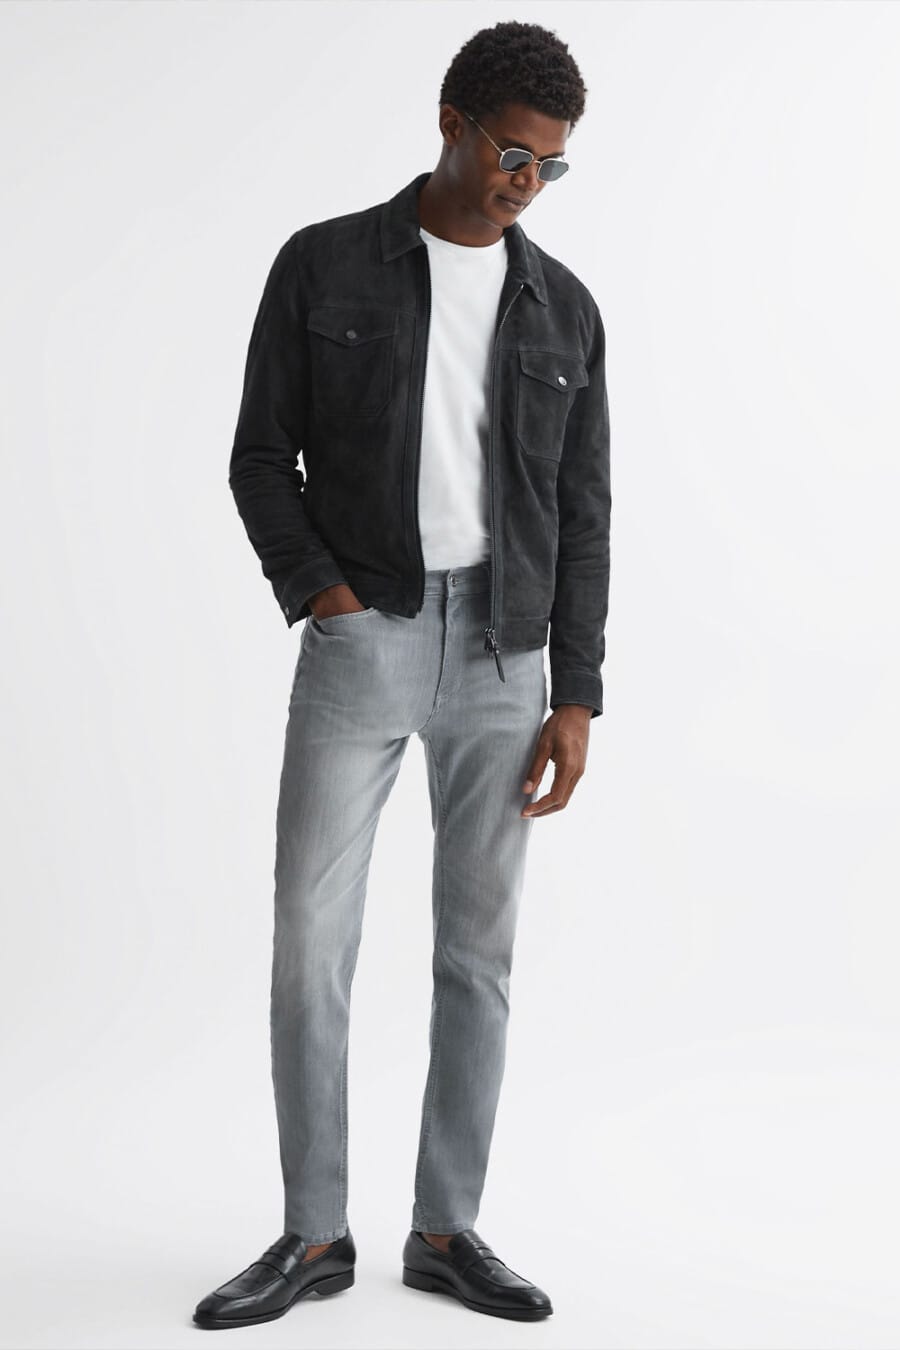 Men's grey jeans, white T-shirt, black suede jacket and black leather penny loafers worn sockless outfit